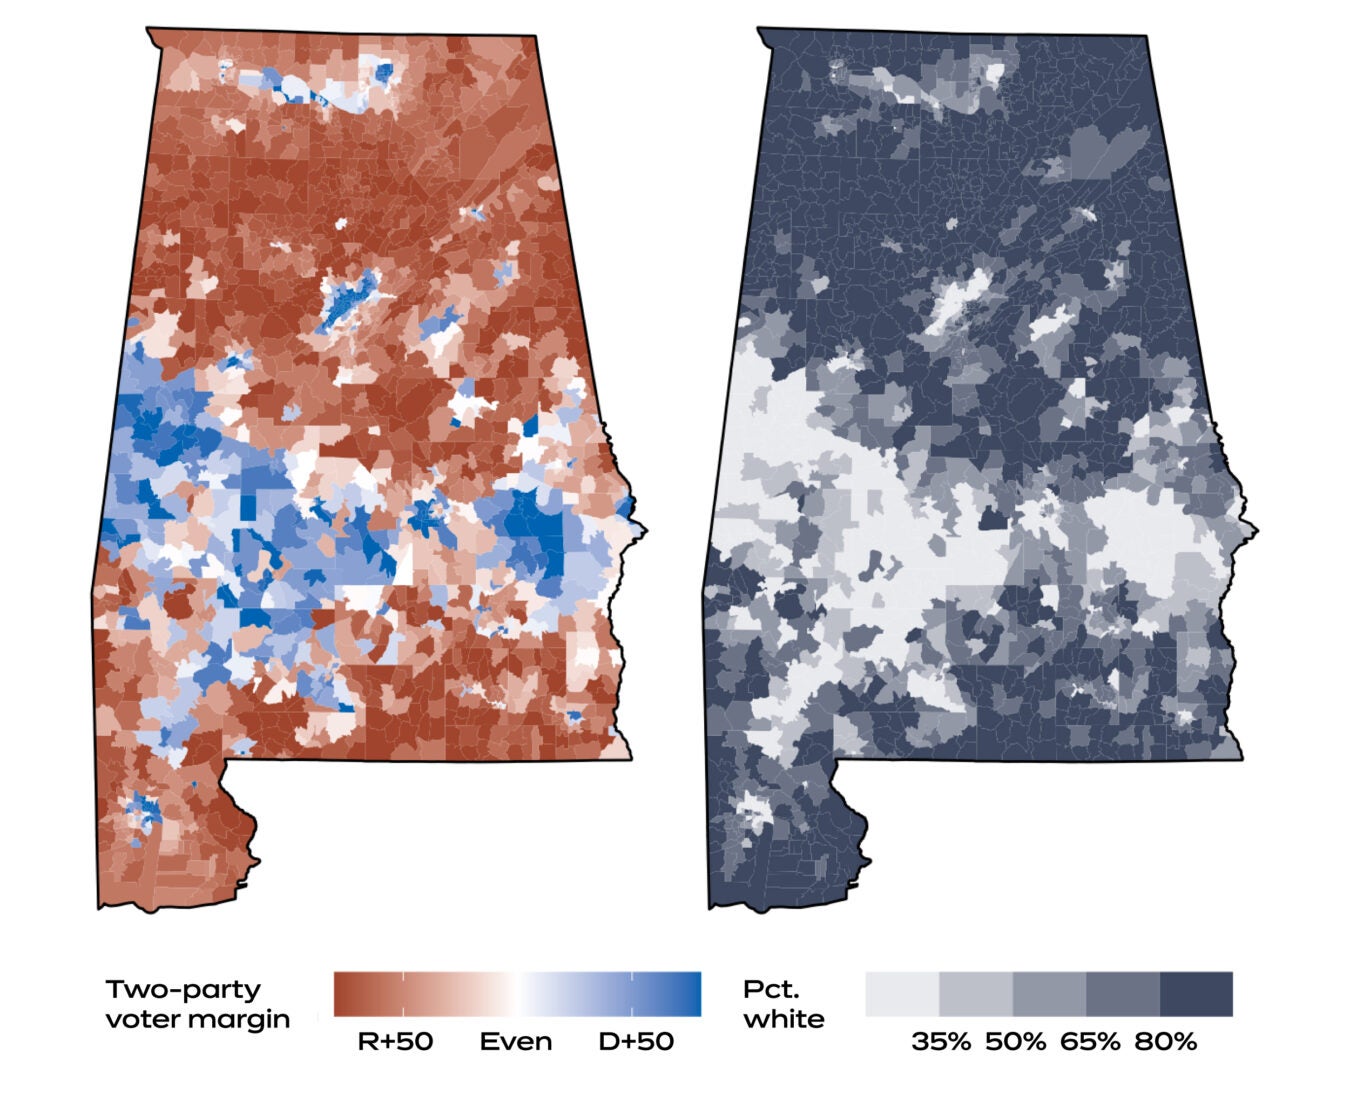 The maps compare partisan thinness to the share of minority voters throughout Alabama.